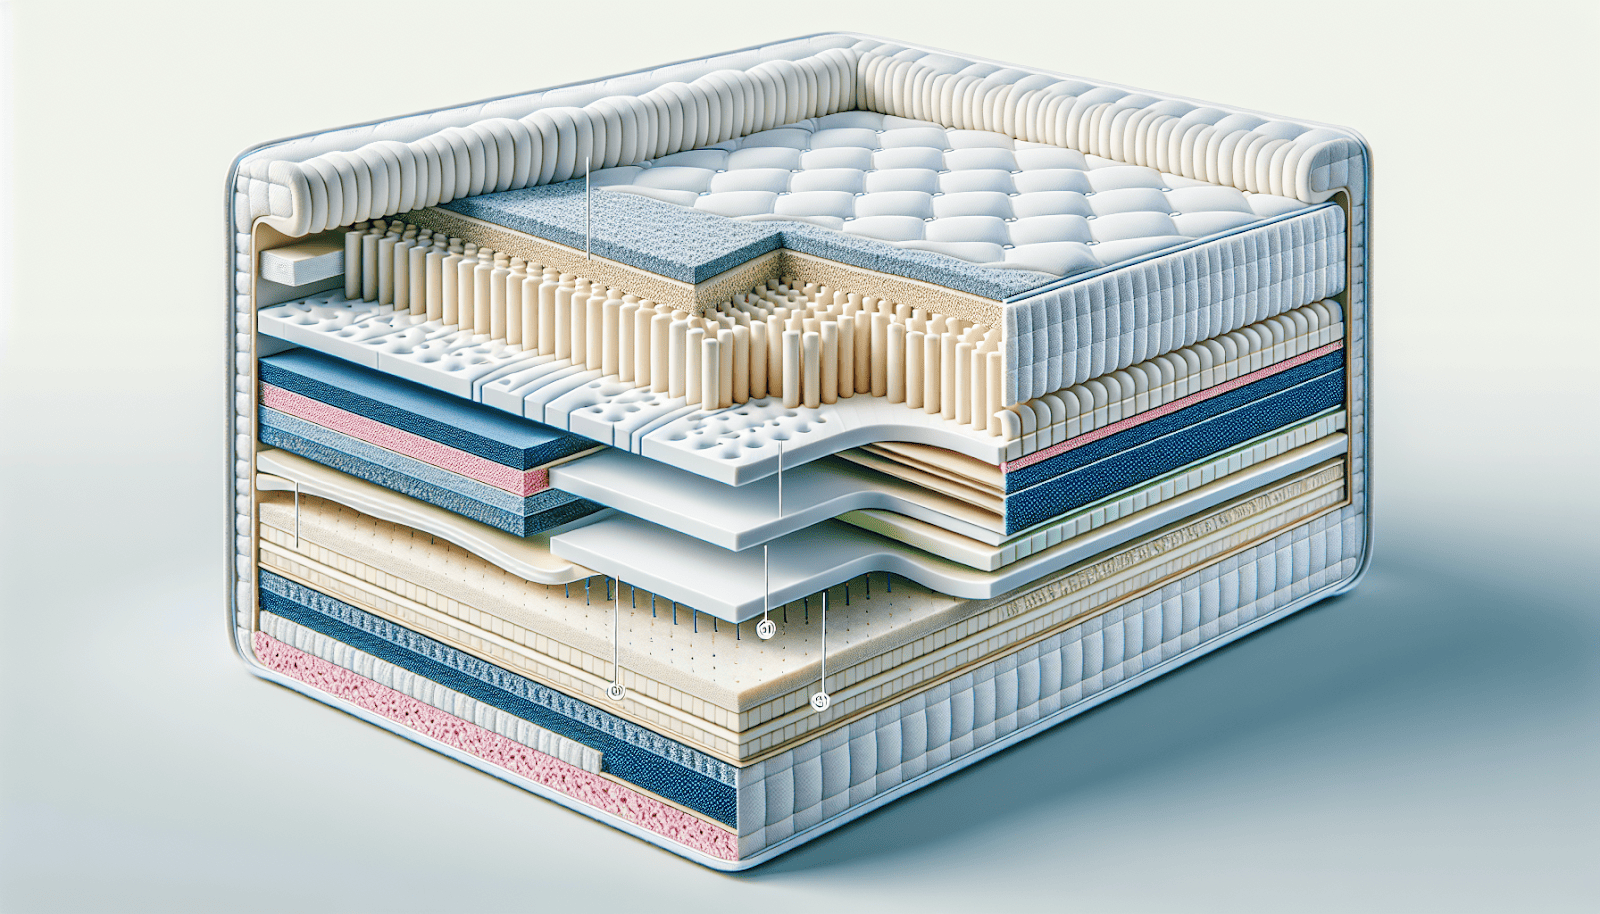 show a cross section of a king size hybrid mattress showing the layers of both pocketed inner coils and layers of memory foam